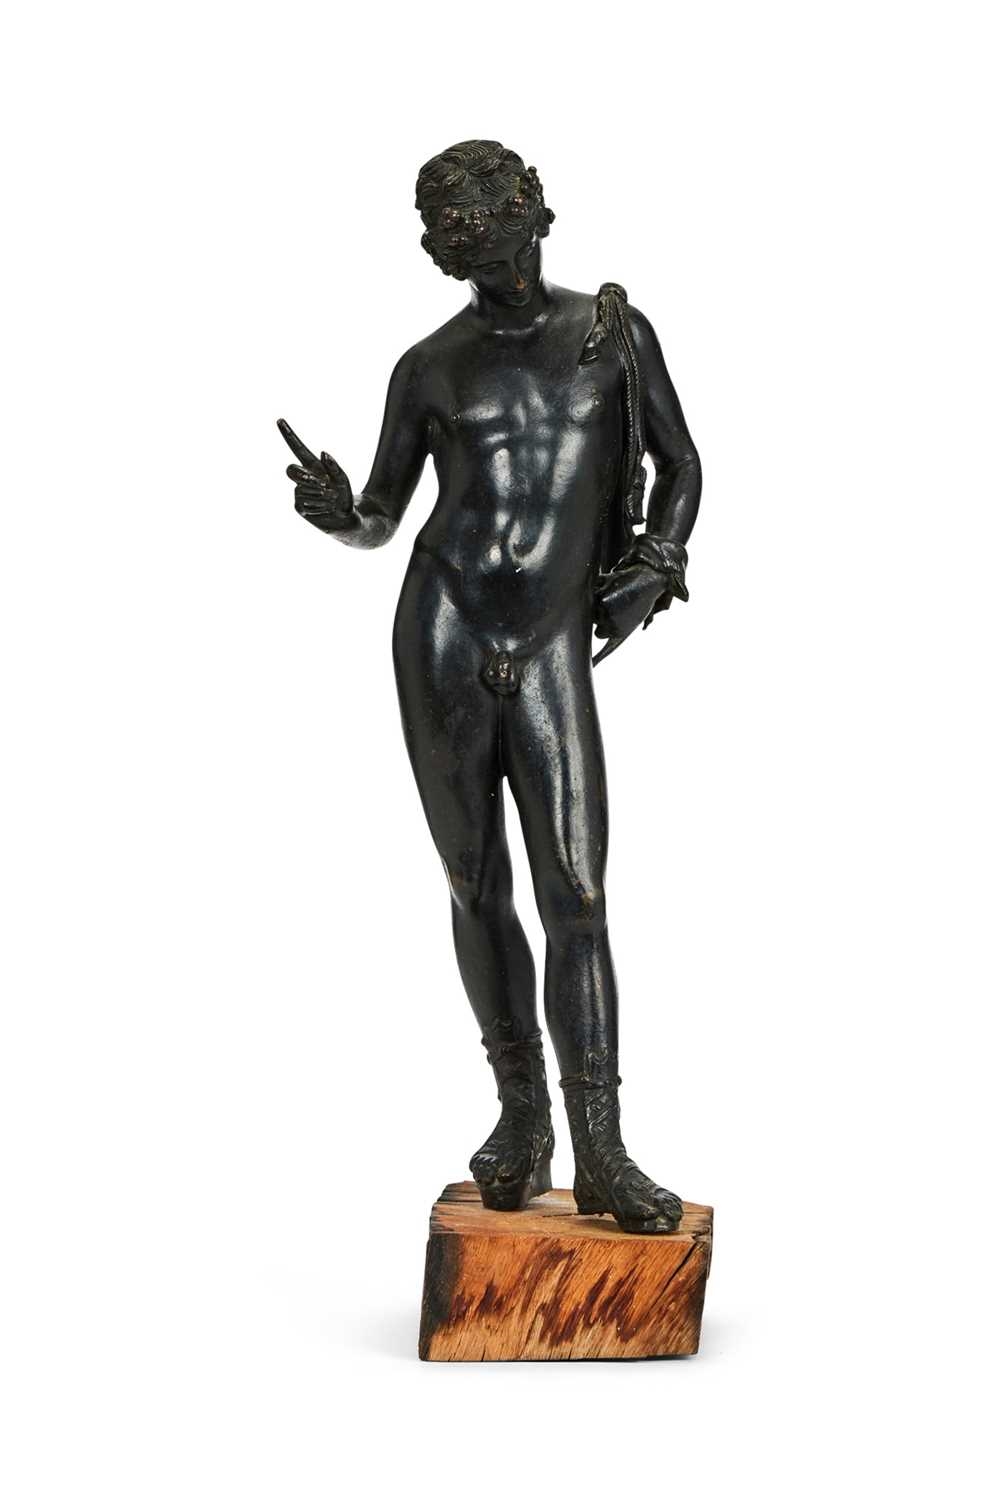 Neapolitan School, 19th Century  After the Antique, A bronze